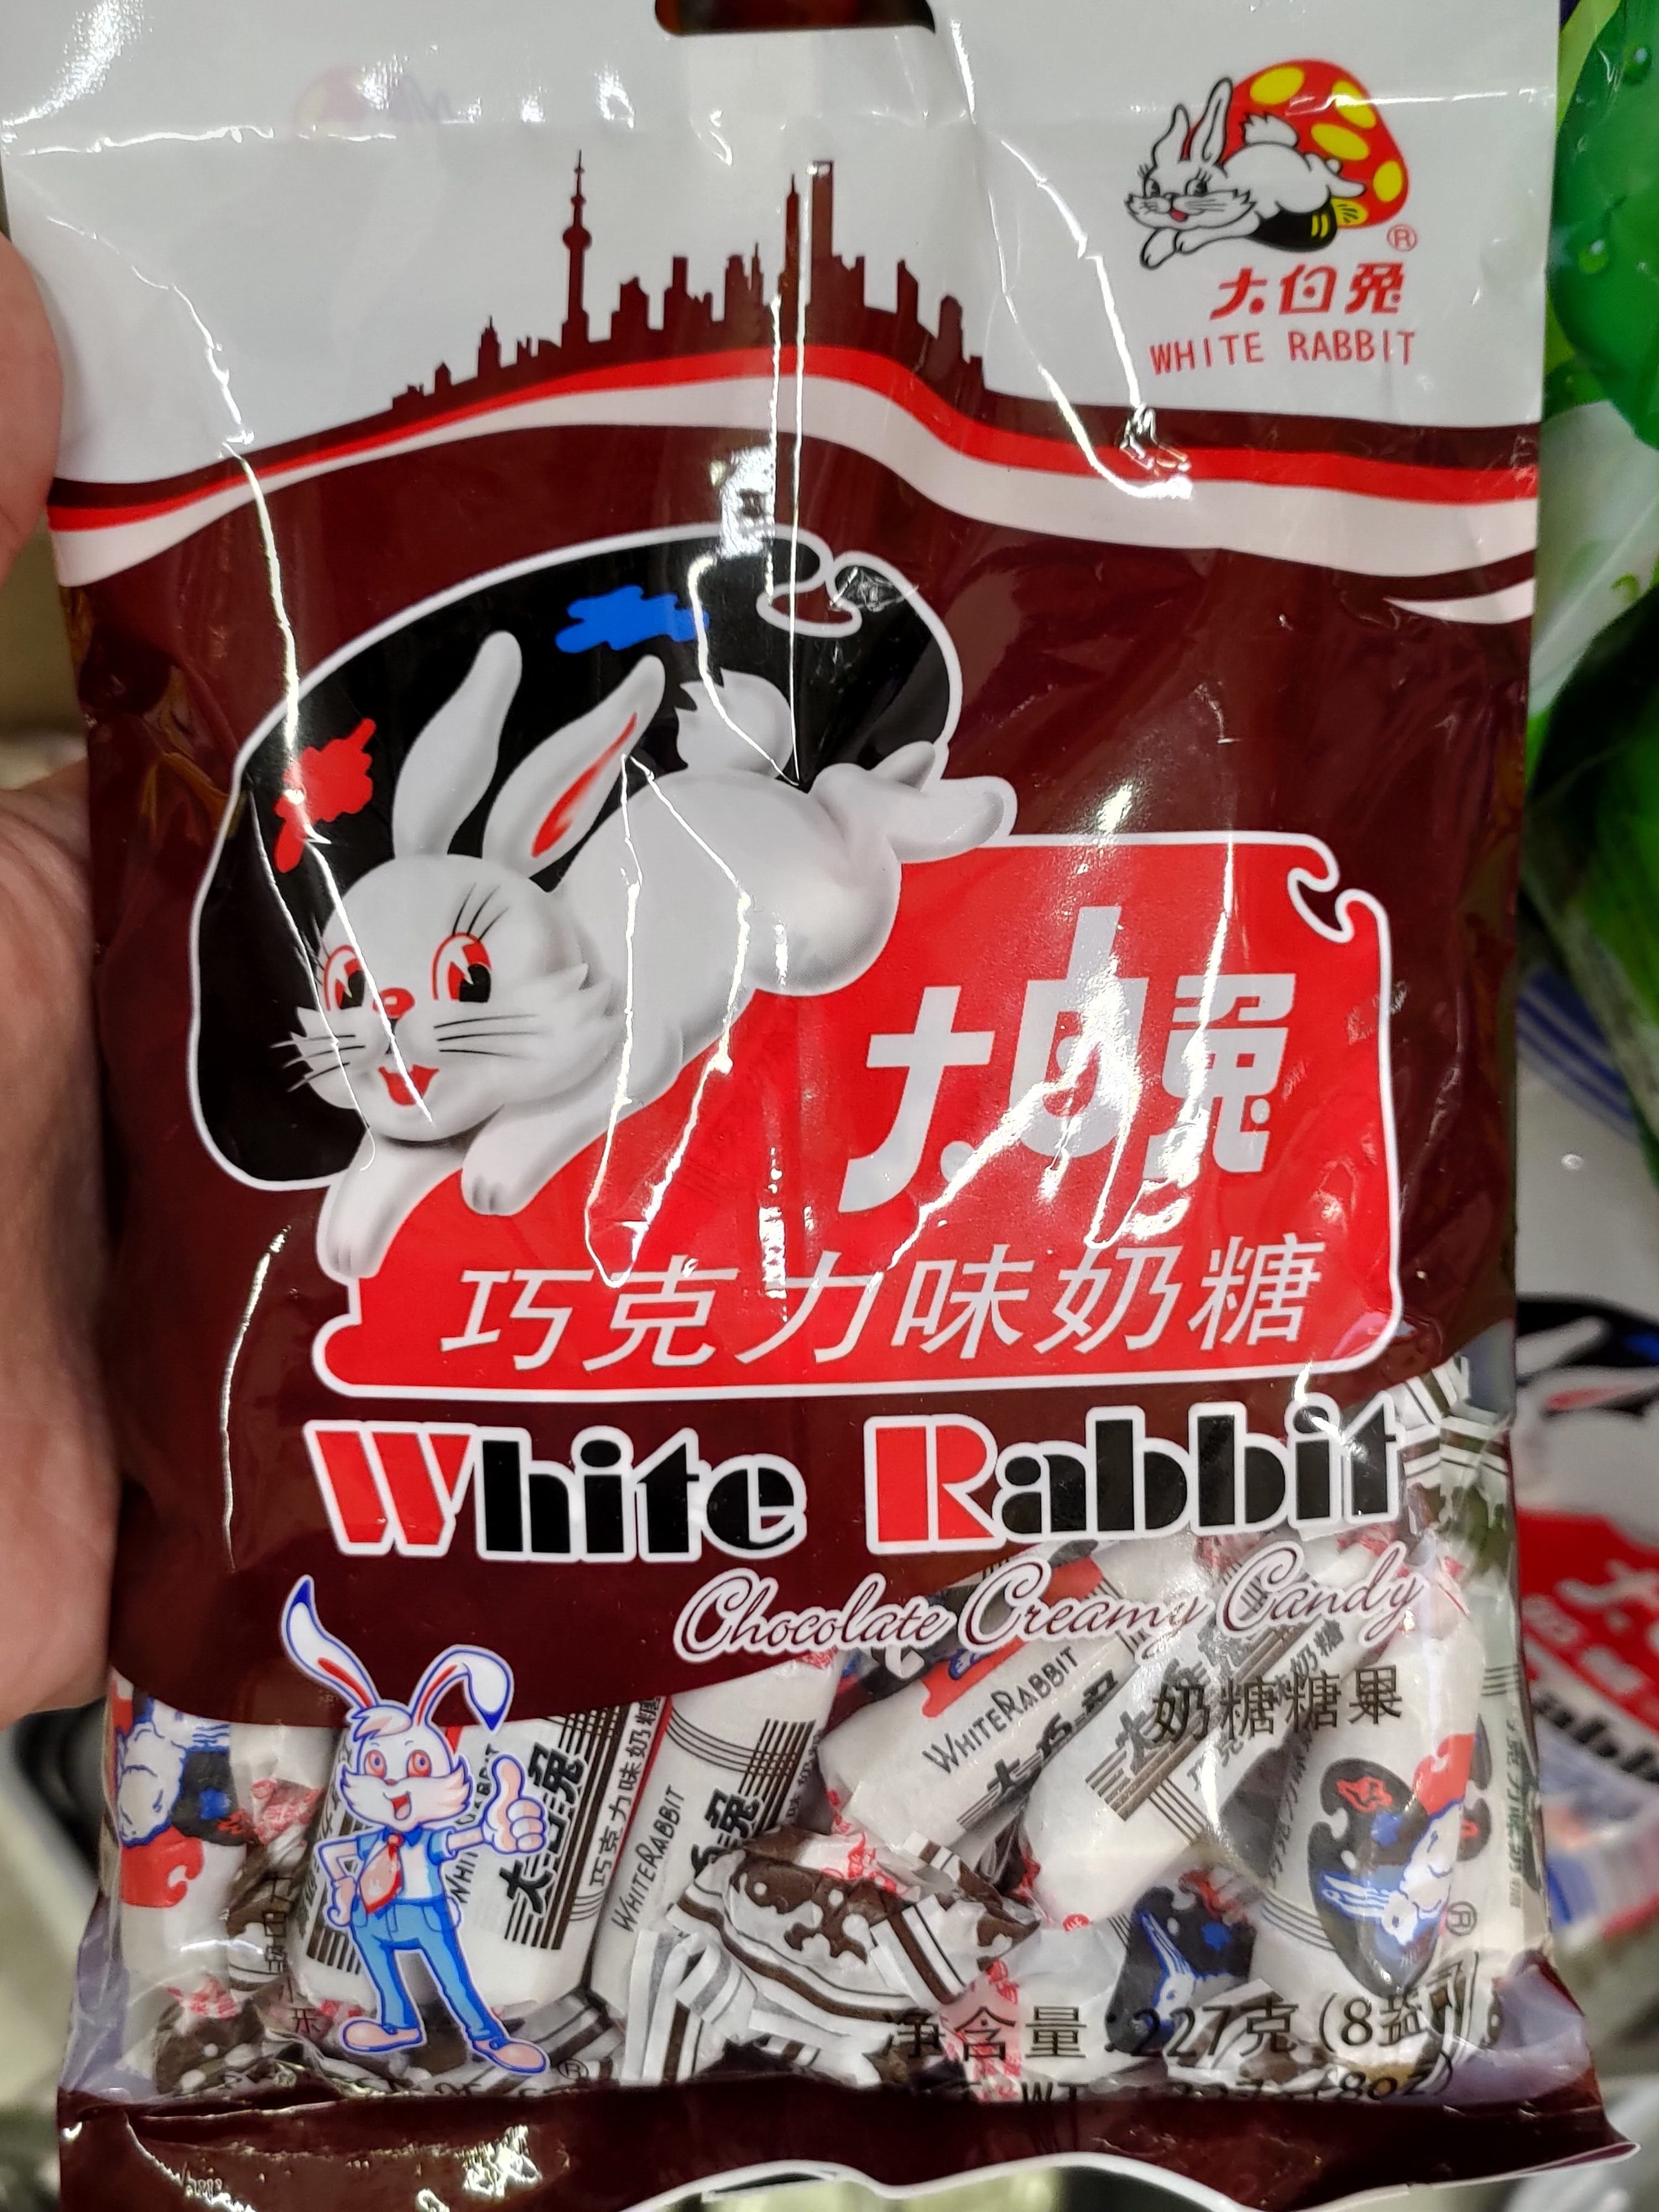 White Rabbit Candy now available in Matcha and Chocolate flavours, and can be found at selected FairPrice - 2